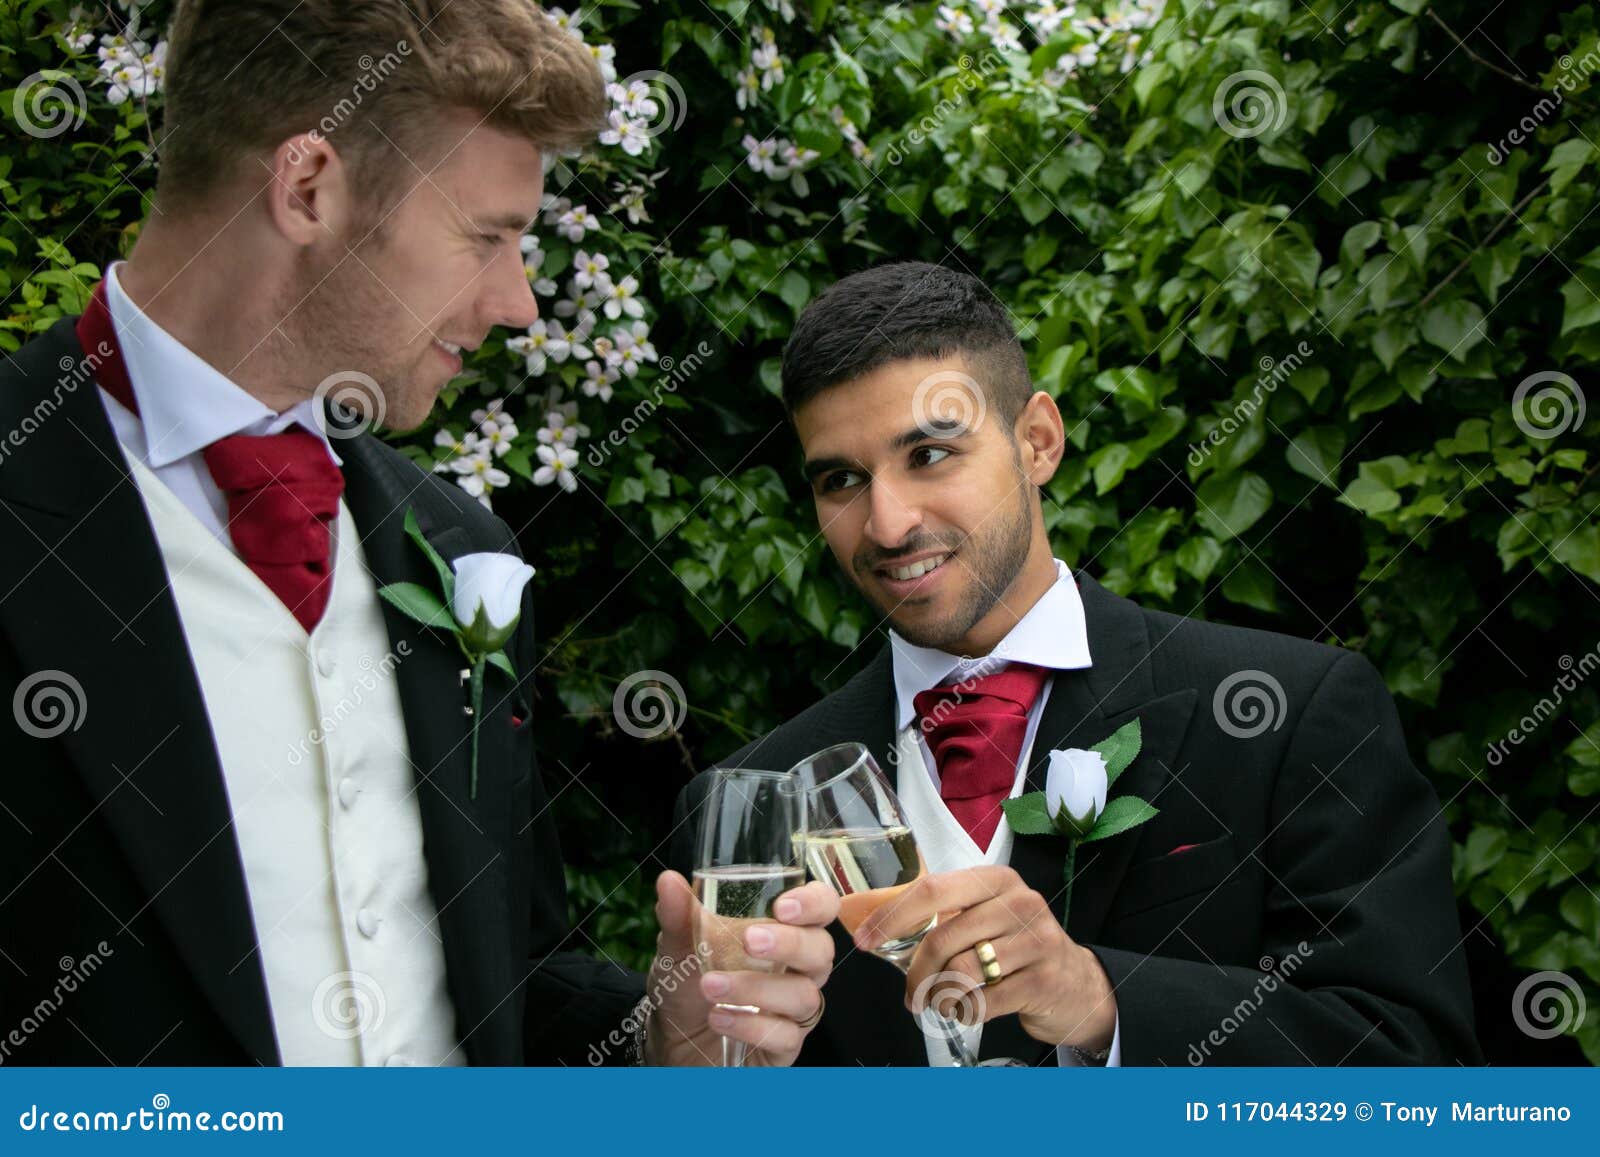 gay couple wedding reception toast being married two men grooms wearing morning suits pose photographs their 117044329